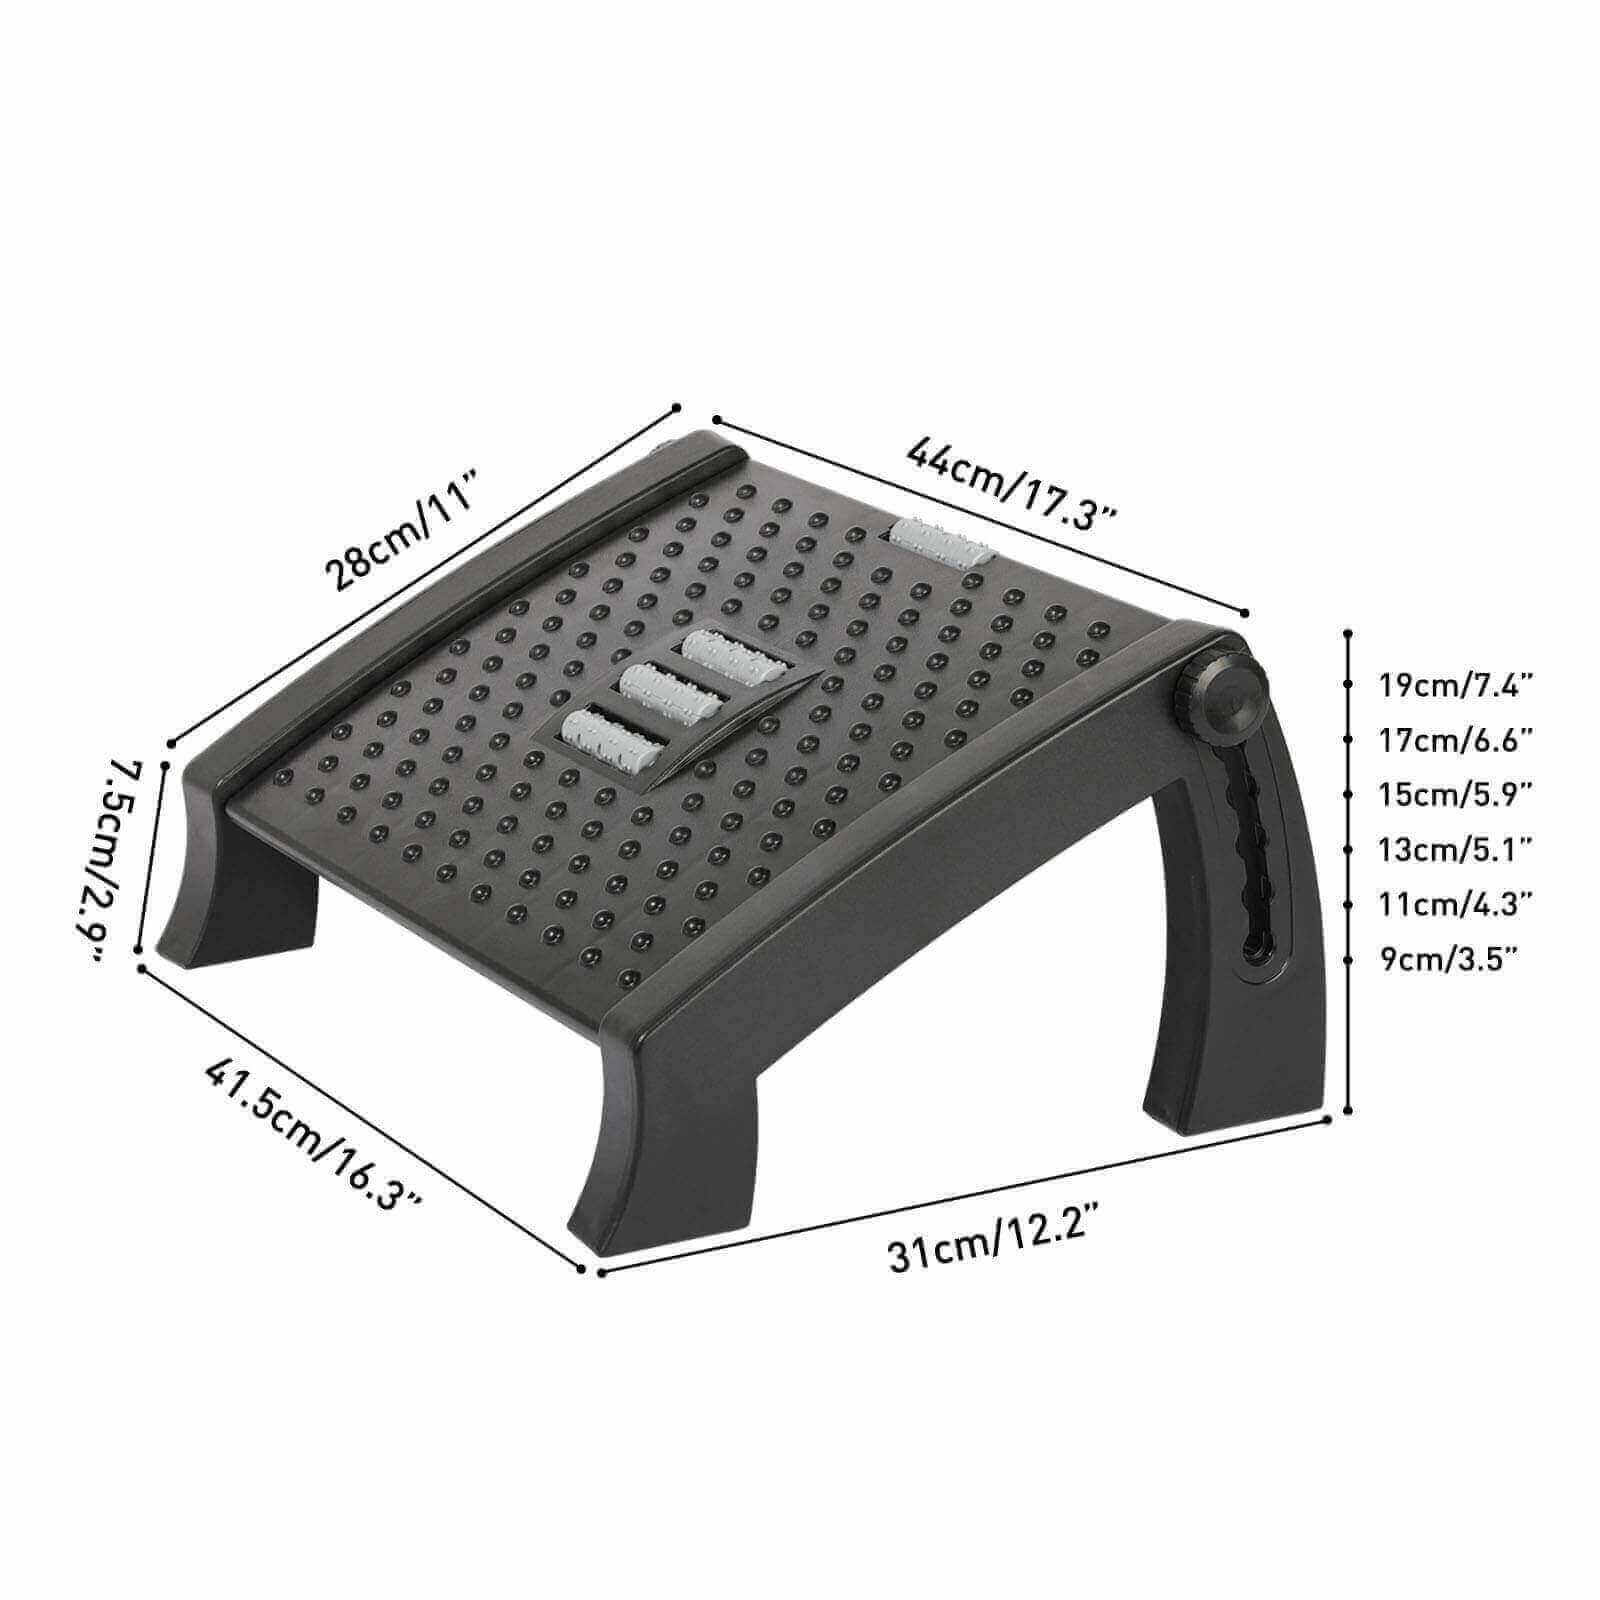 Under Desk Foot Rest Compact with Massage Function Adjustable